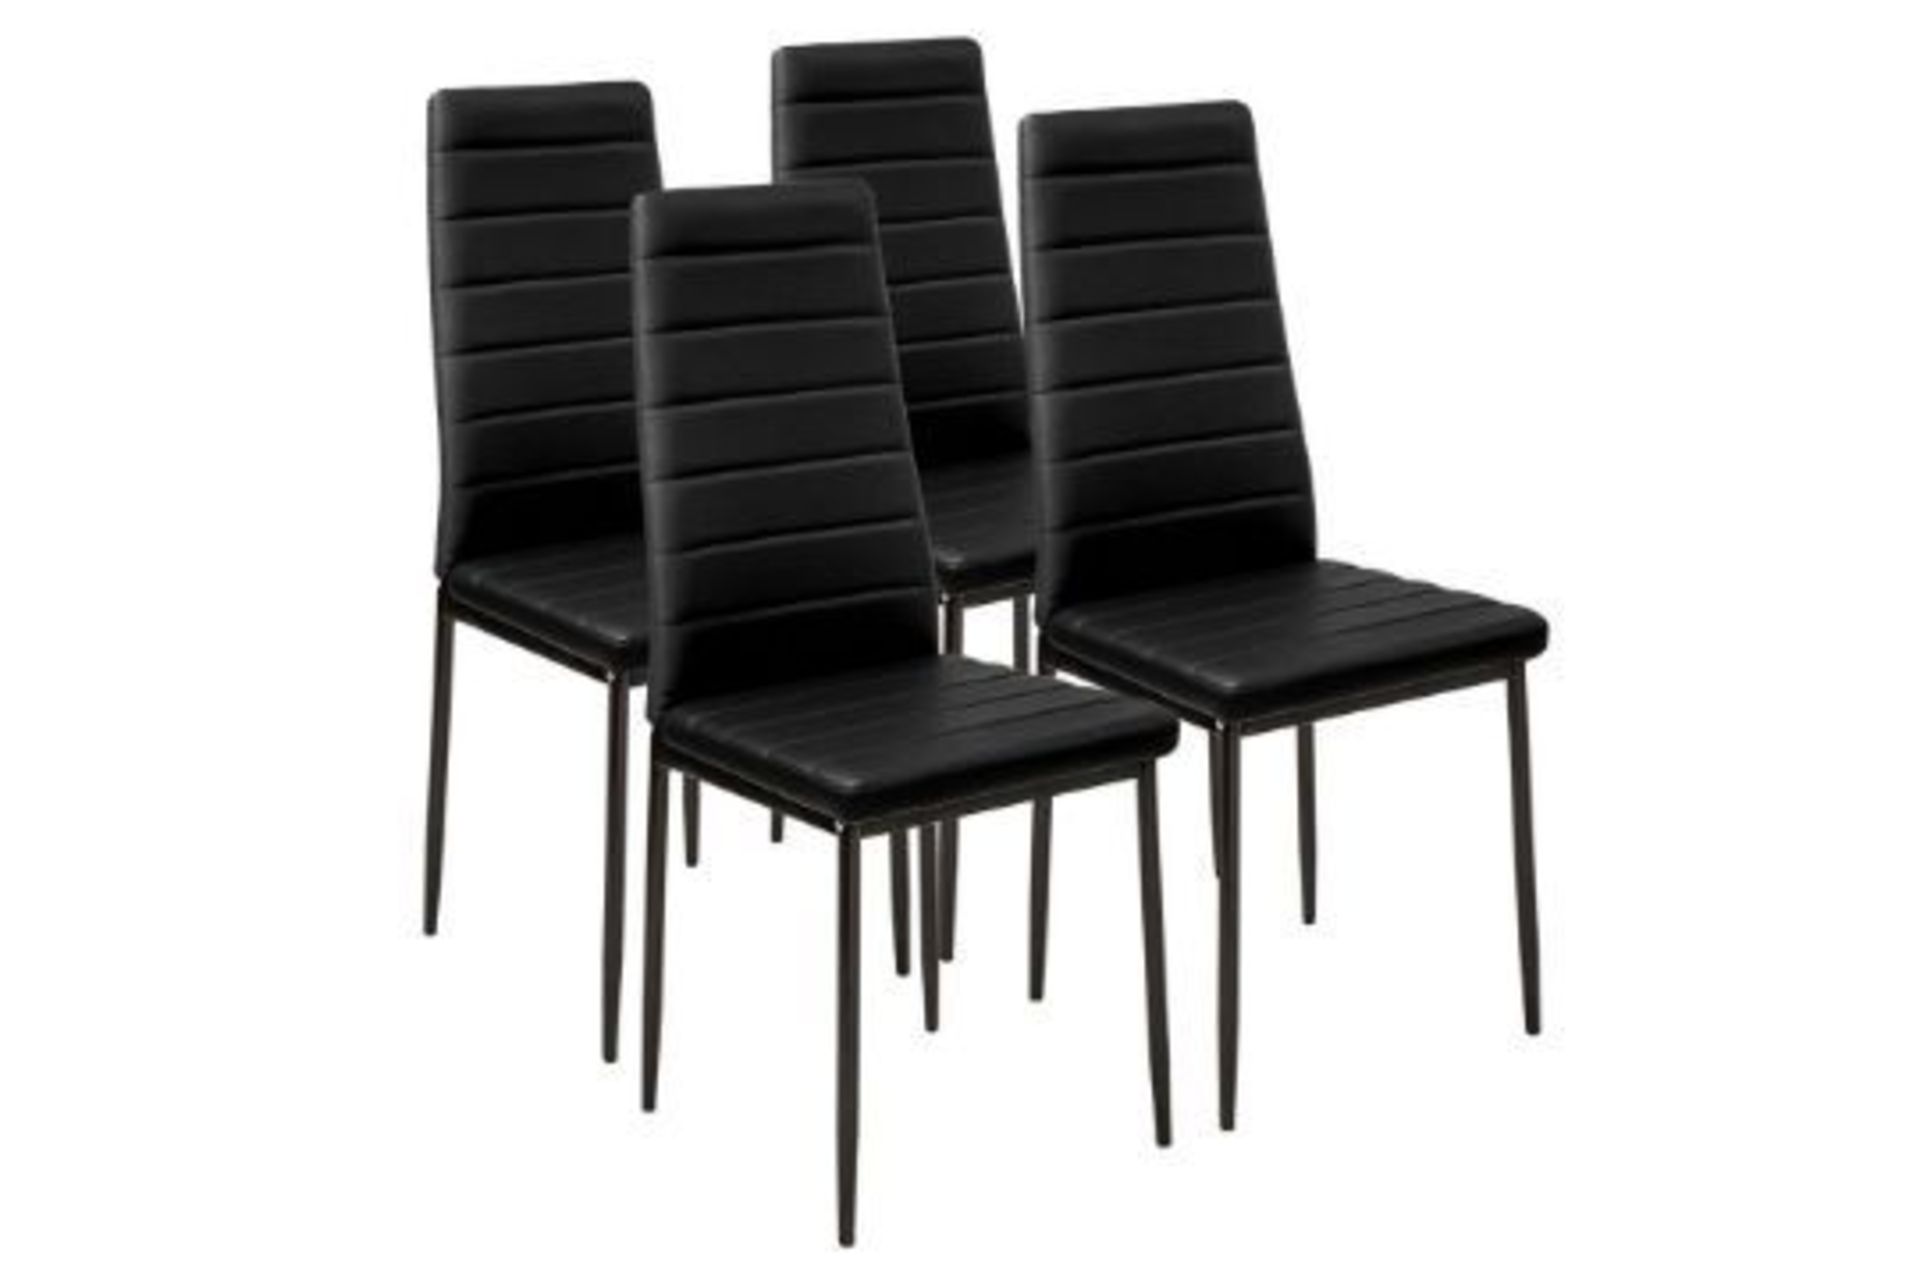 4 X NEW BOXED Modern Synthetic Leather Dining Chairs In Black. RRP £99.99 each, giving this lot a